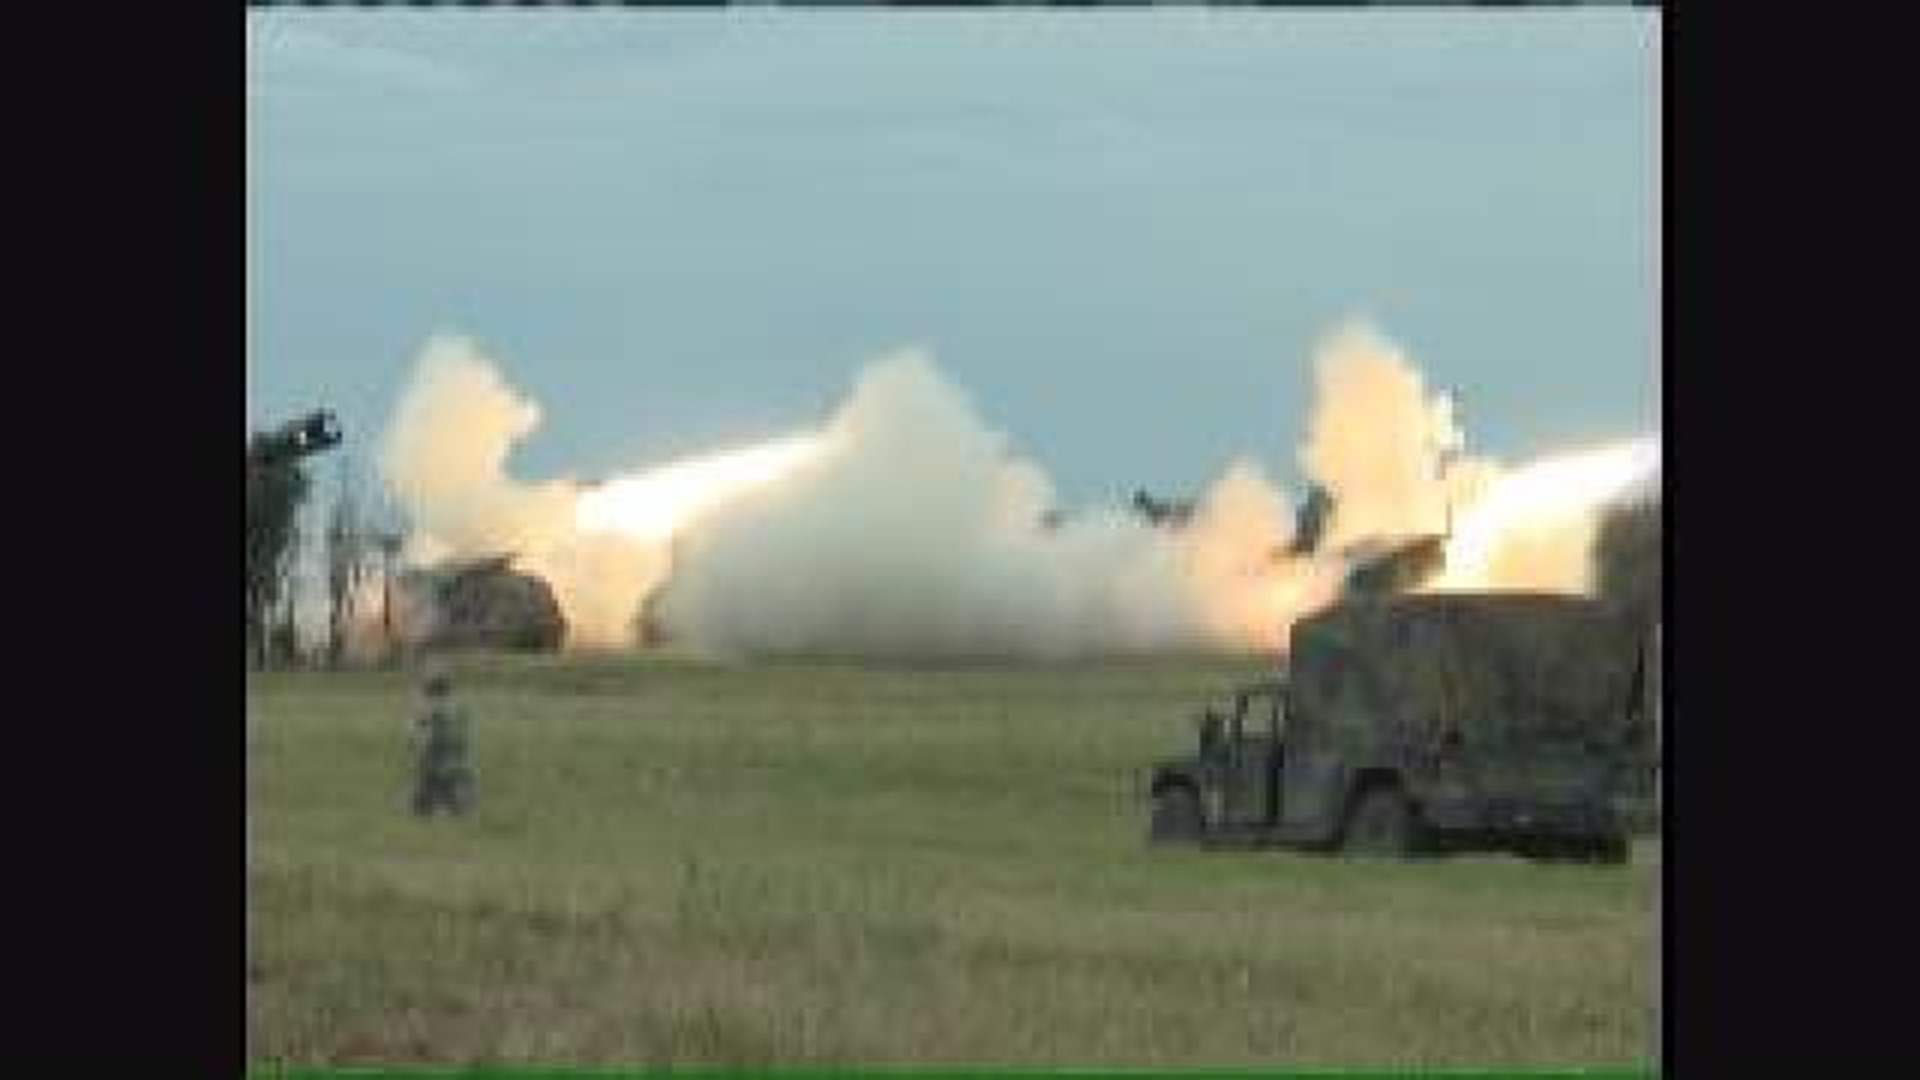 Artillery Drill at Ft. Chaffee Prompts Noise Complaints